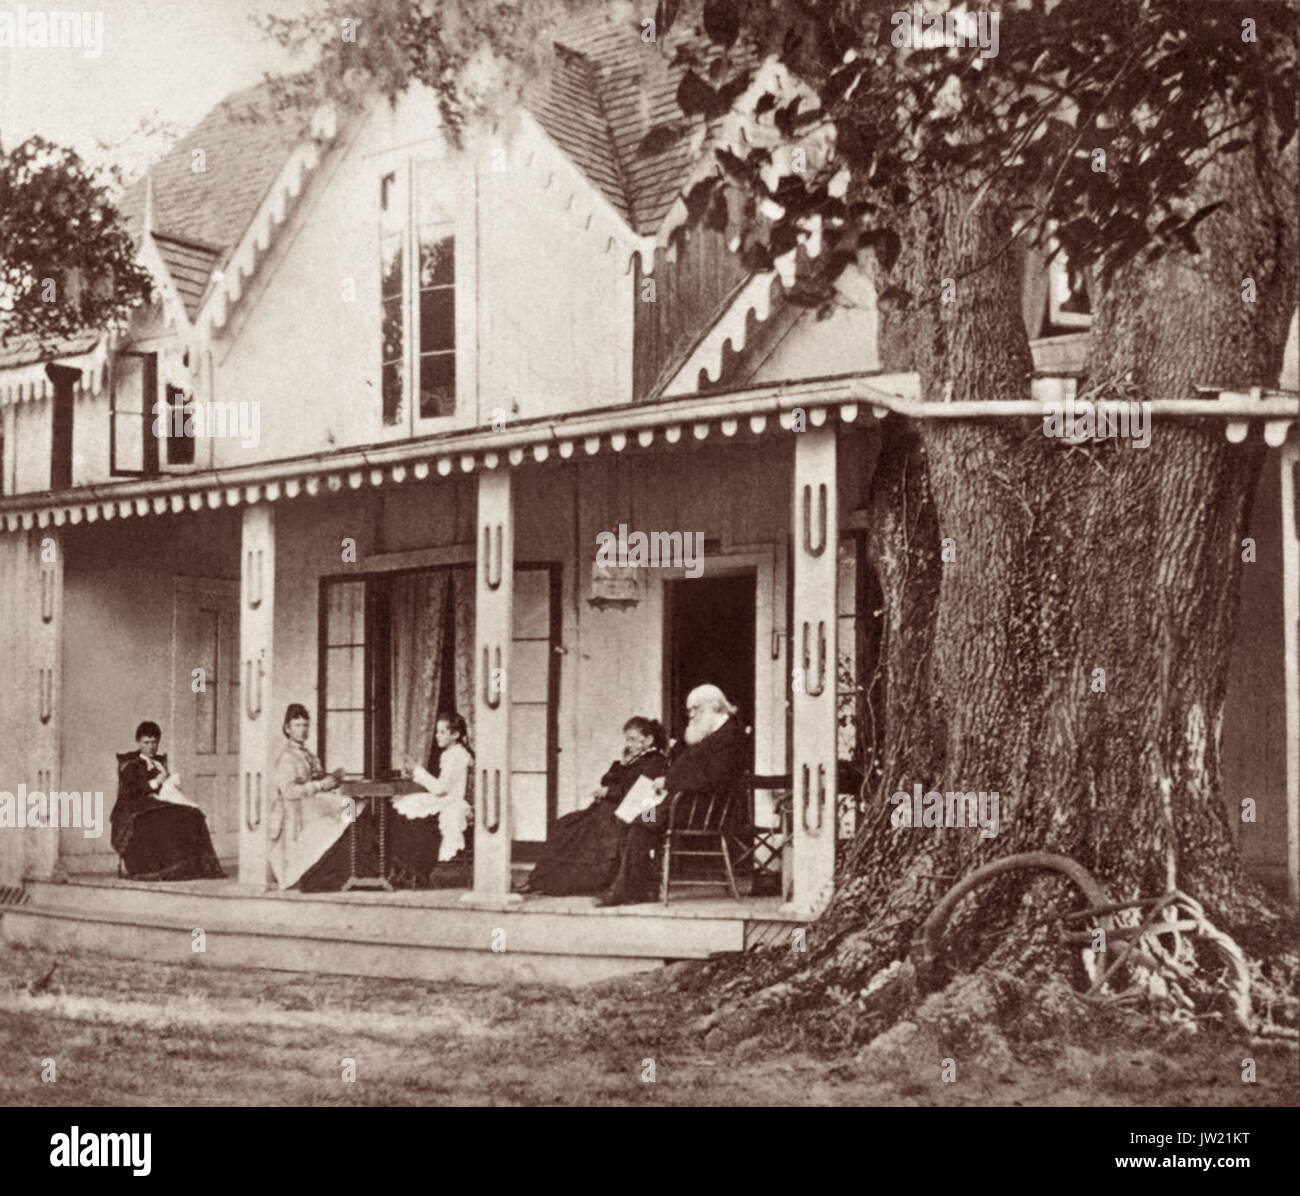 Harriet Beecher Stowe (1811-1896) and her husband Cyril Stowe, along with their daughters, on the porch of their post-Civil War winter home in Mandarin, Florida overlooking the St. Johns River. The Stowes were abolitionists and Mrs. Stowe was an author, best known for her novel Uncle Tom's Cabin. The Stowes wintered in Mandarin (now a Jacksonville neighborhood) between 1867 and 1884. Stories about Mandarin are compiled in the book Palmetto Leaves, written by Harriet. The Stowes would host Bible studies in their home where Cyril would teach, often on the porch pictured here. Stock Photo